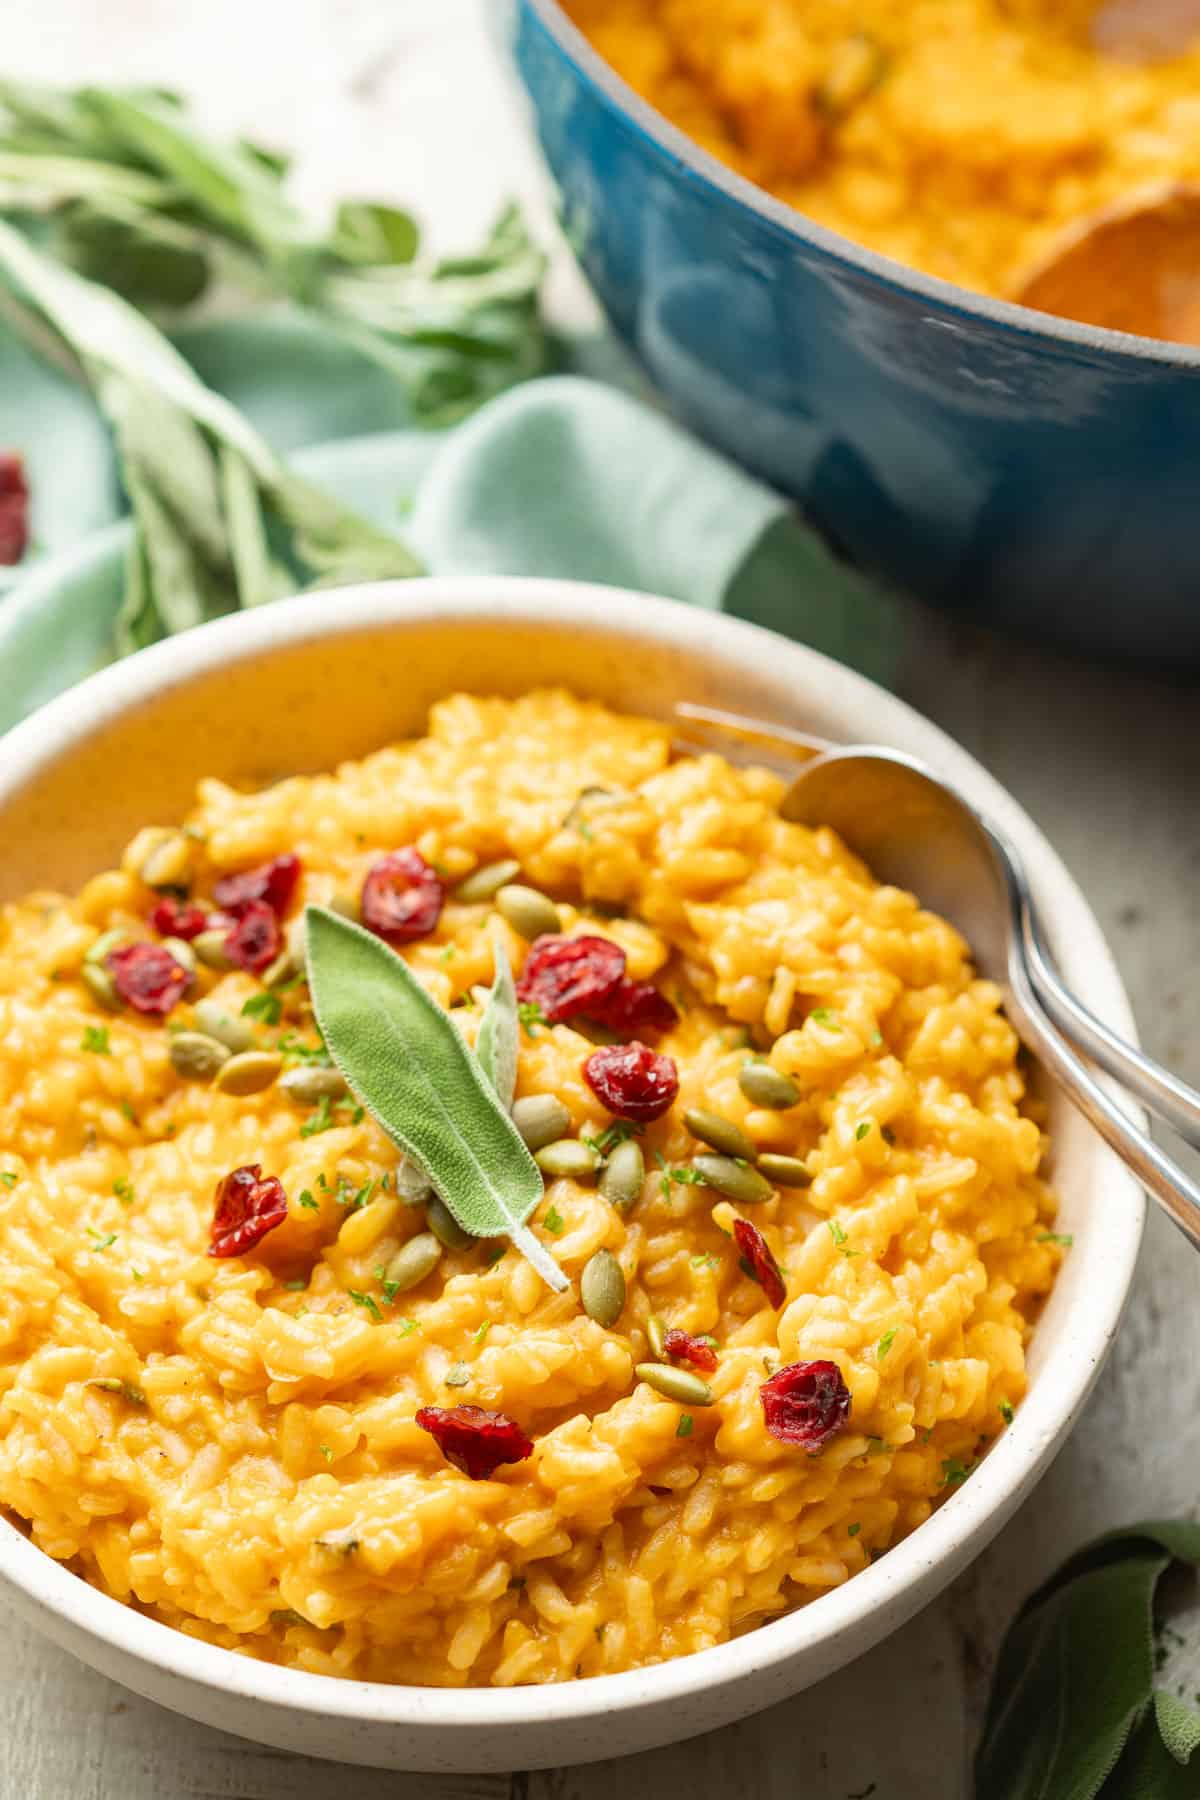 Bowl of Pumpkin Risotto with a blue pot in the background.